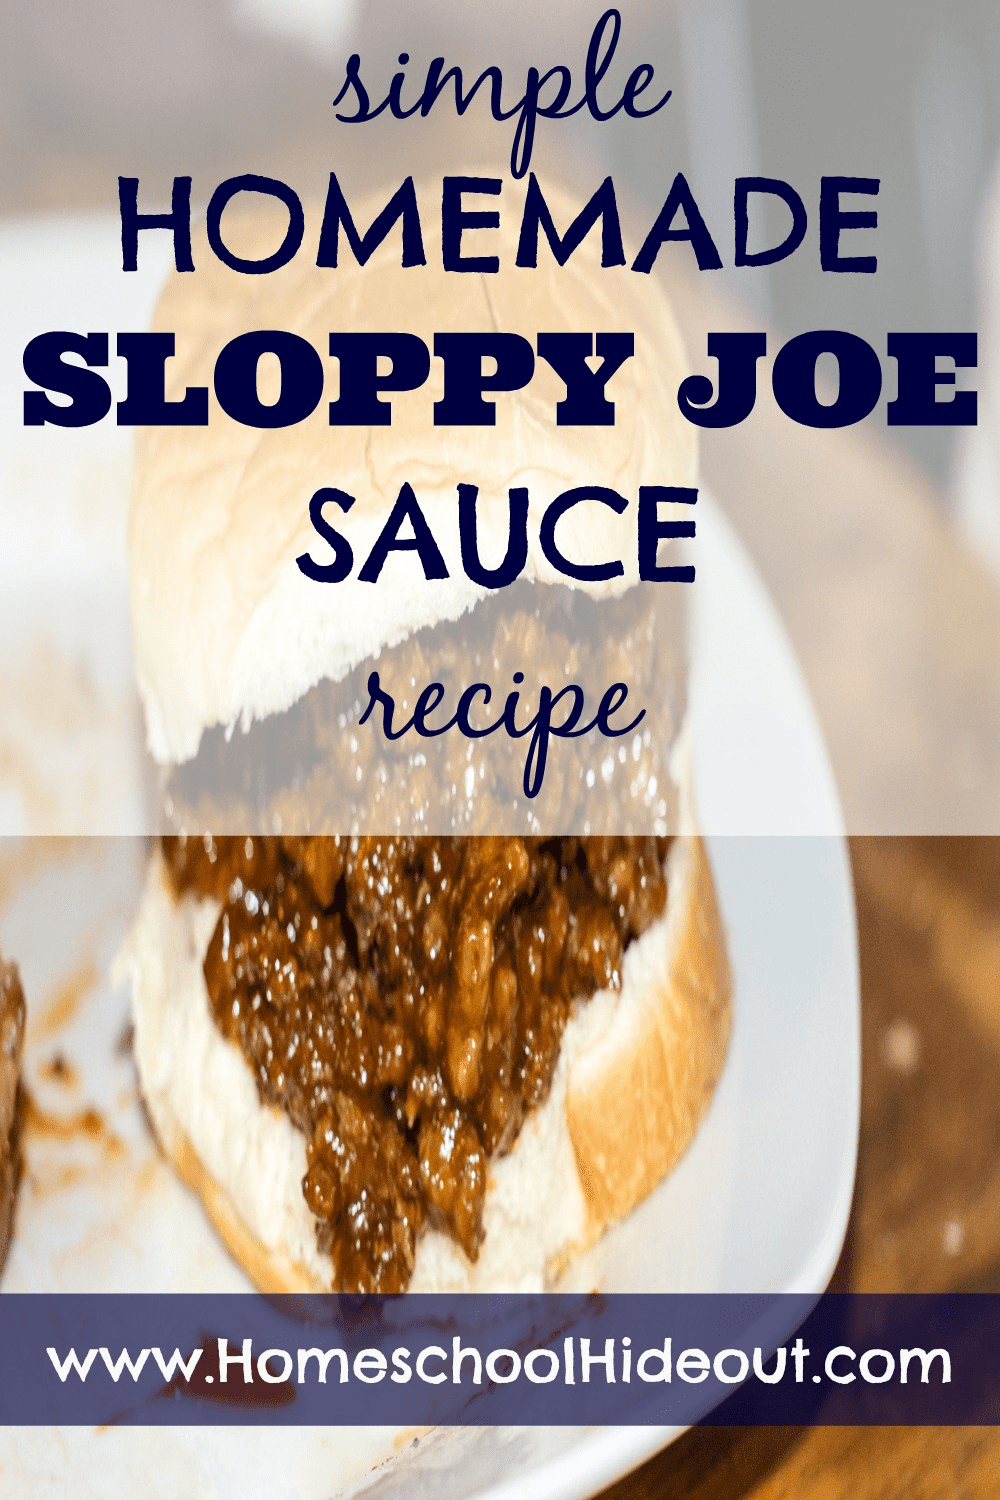 Oh em gee! That was the best homemade Sloppy Joe sauce recipe I've ever had. Fast and easy and best of all, I had ALL the ingredients in my fridge!